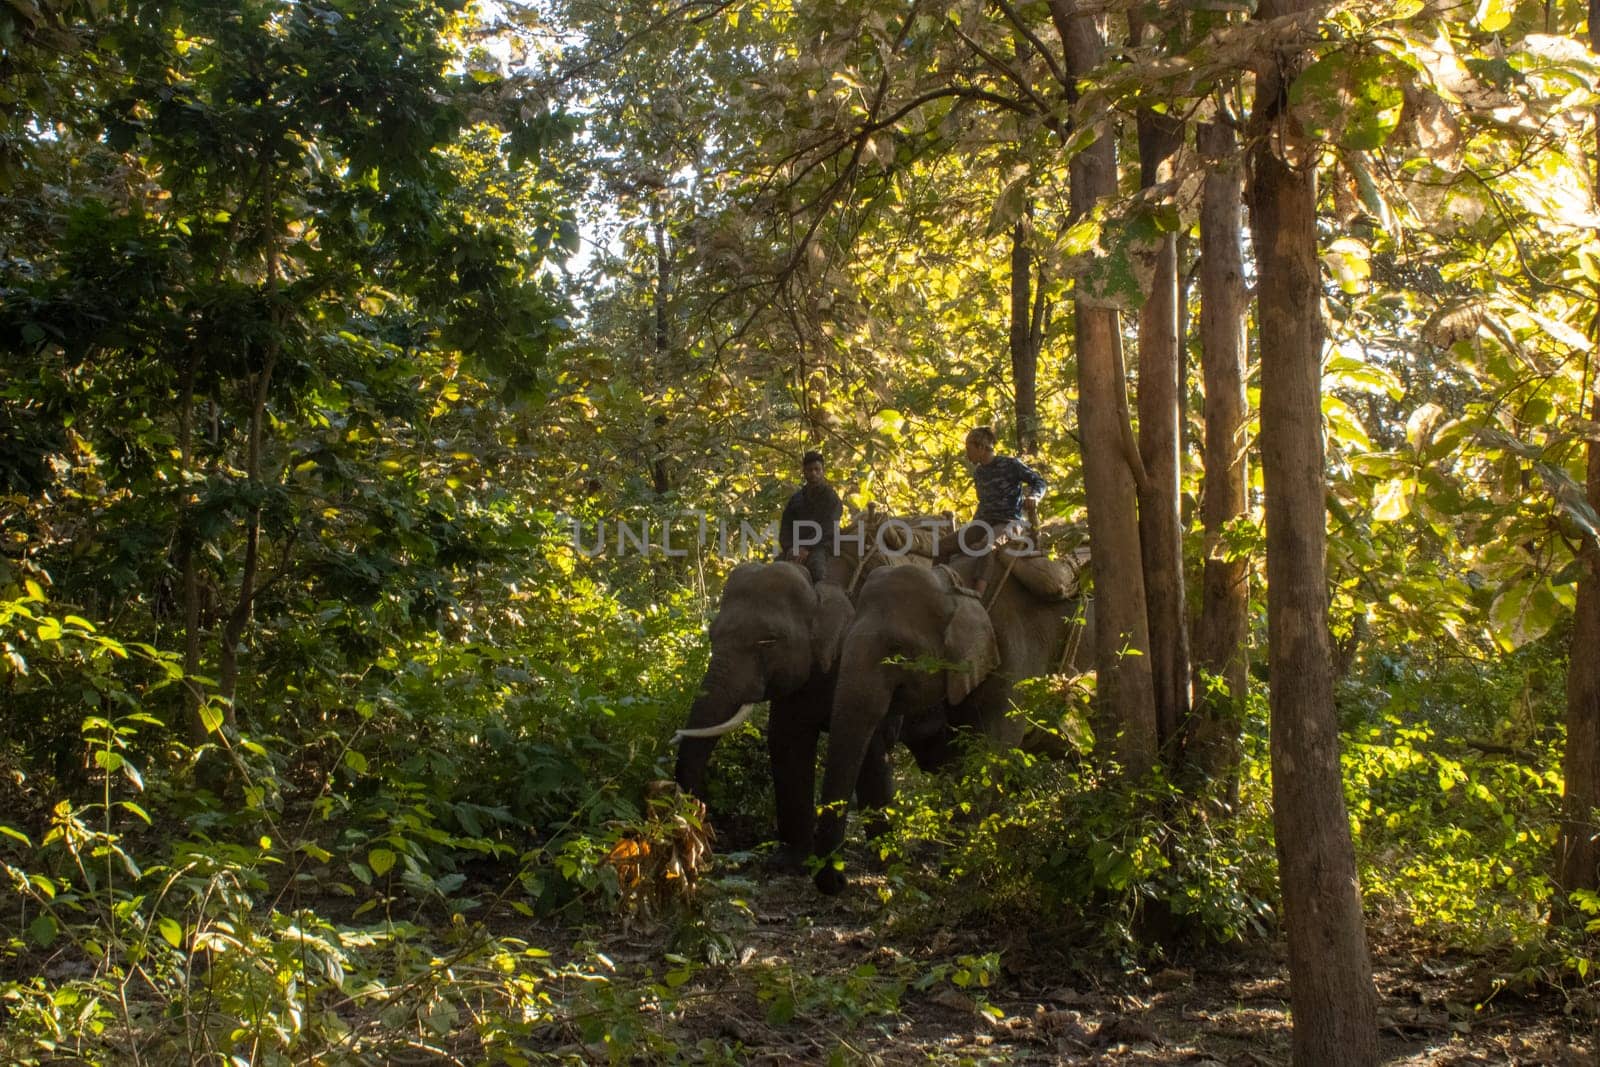 Witness the poetry of nature as your eyes capture the graceful harmony of elephants moving through the lush jungles of Uttarakhand.High quality image